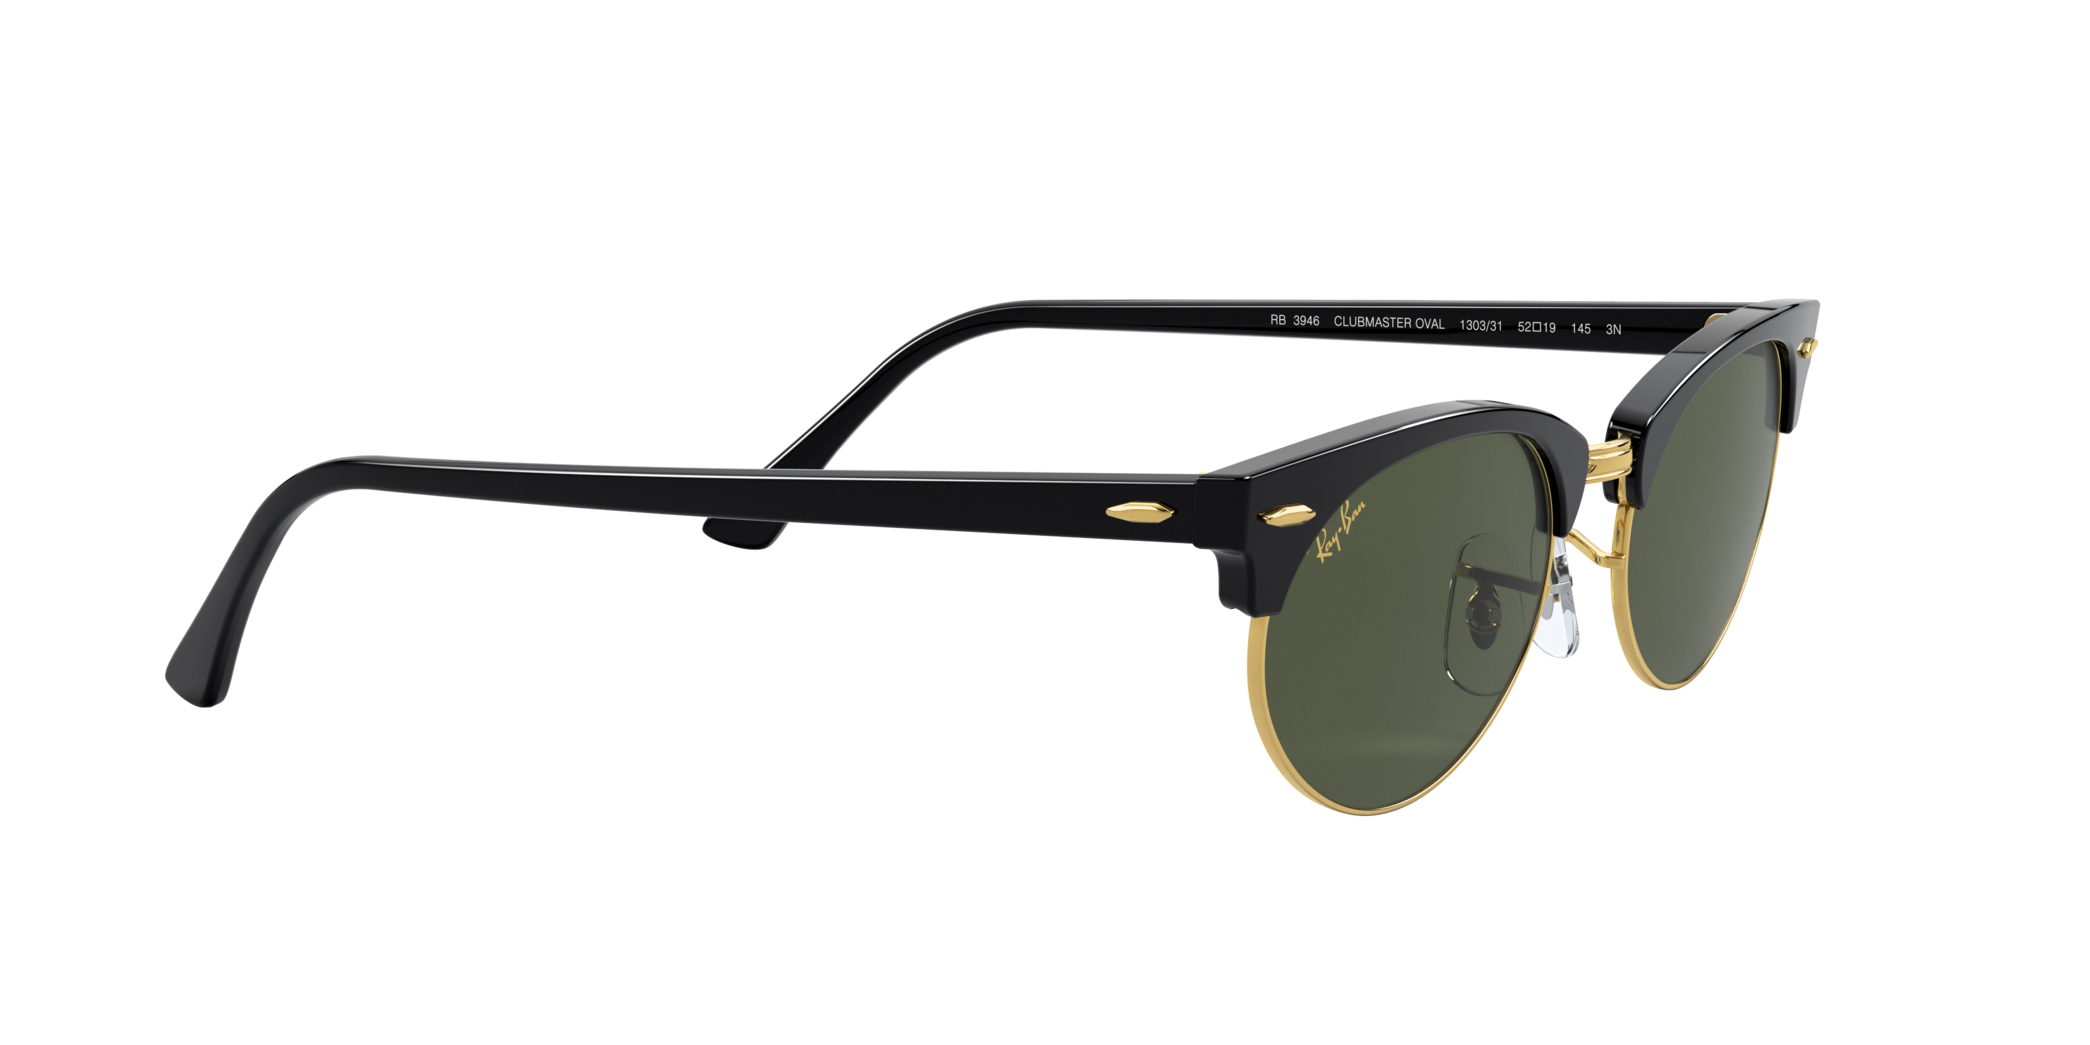 Buy Ray-Ban Clubmaster Oval Legend Gold Sunglasses Online.